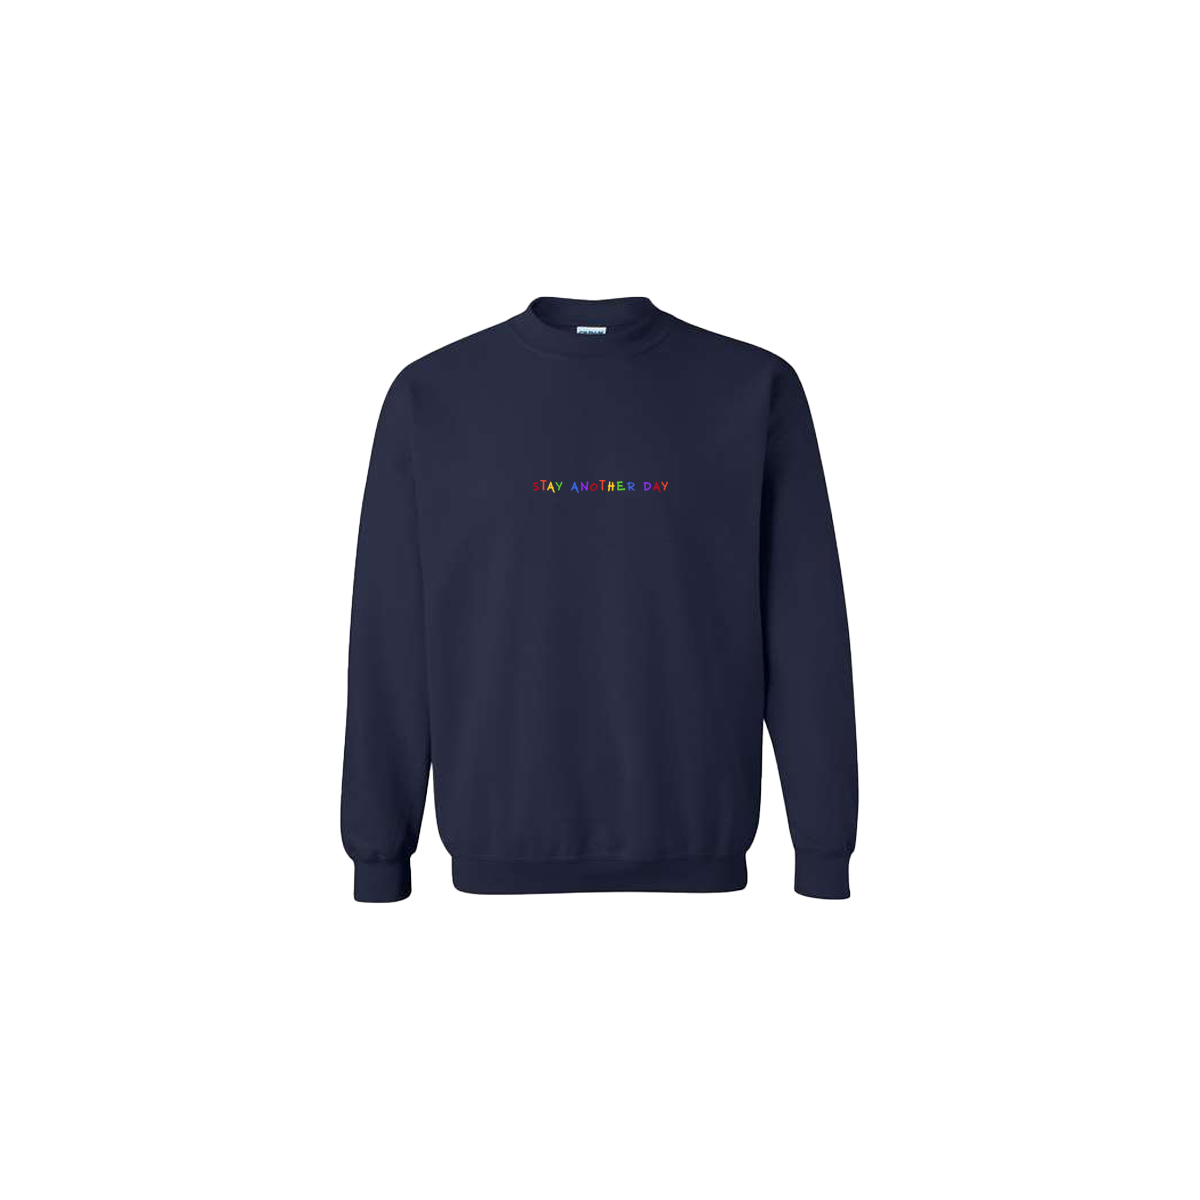 Stay Another Day Rainbow Embroidered Navy Blue Crewneck - Mental Health Awareness Clothing